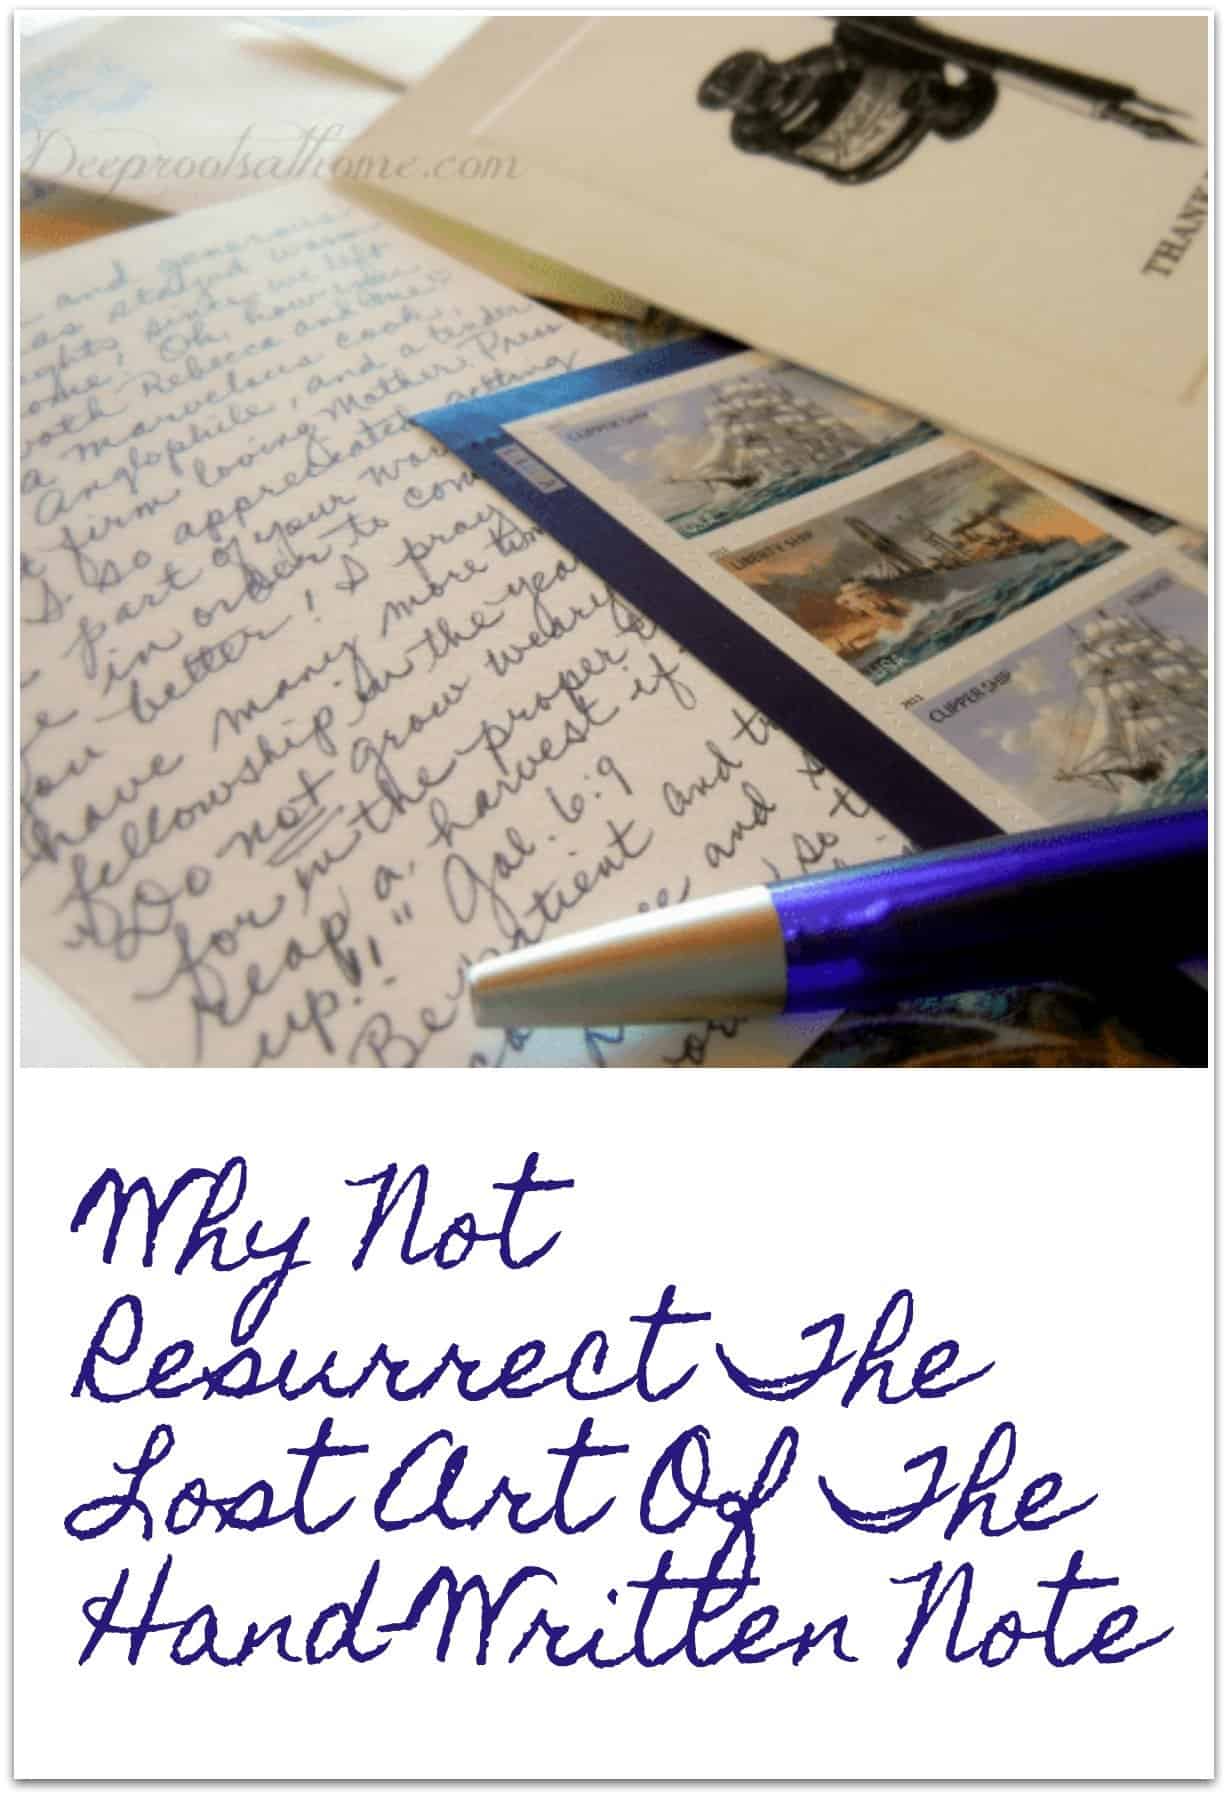 Why Not Resurrect The Lost Art Of The Hand-Written Note, writing a note to mom and dad